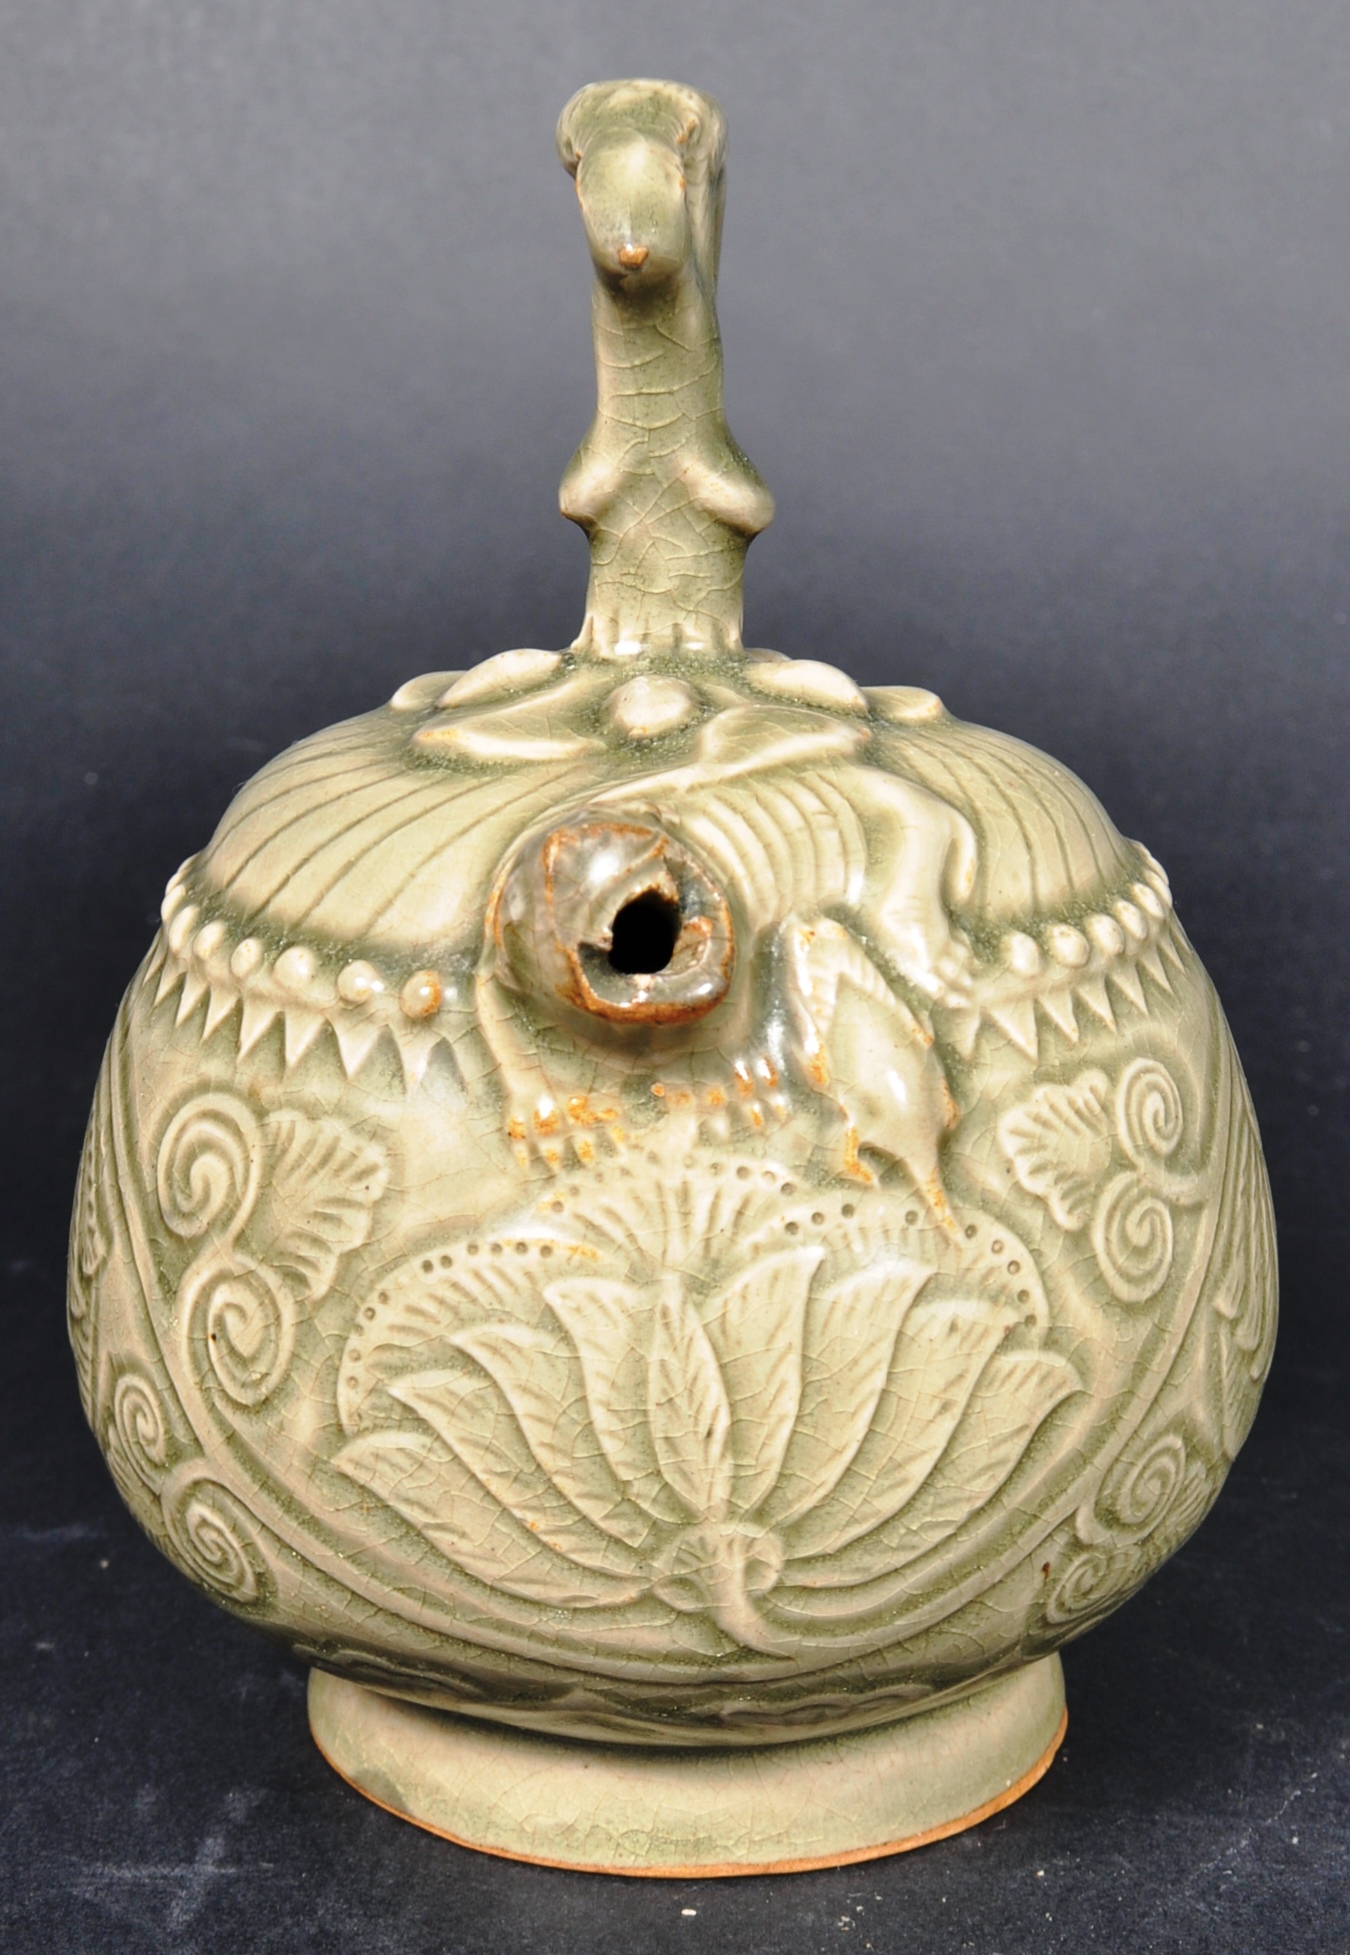 19TH CENTURY SONG DYNASTY STYLE CELADON TEAPOT - Image 2 of 6